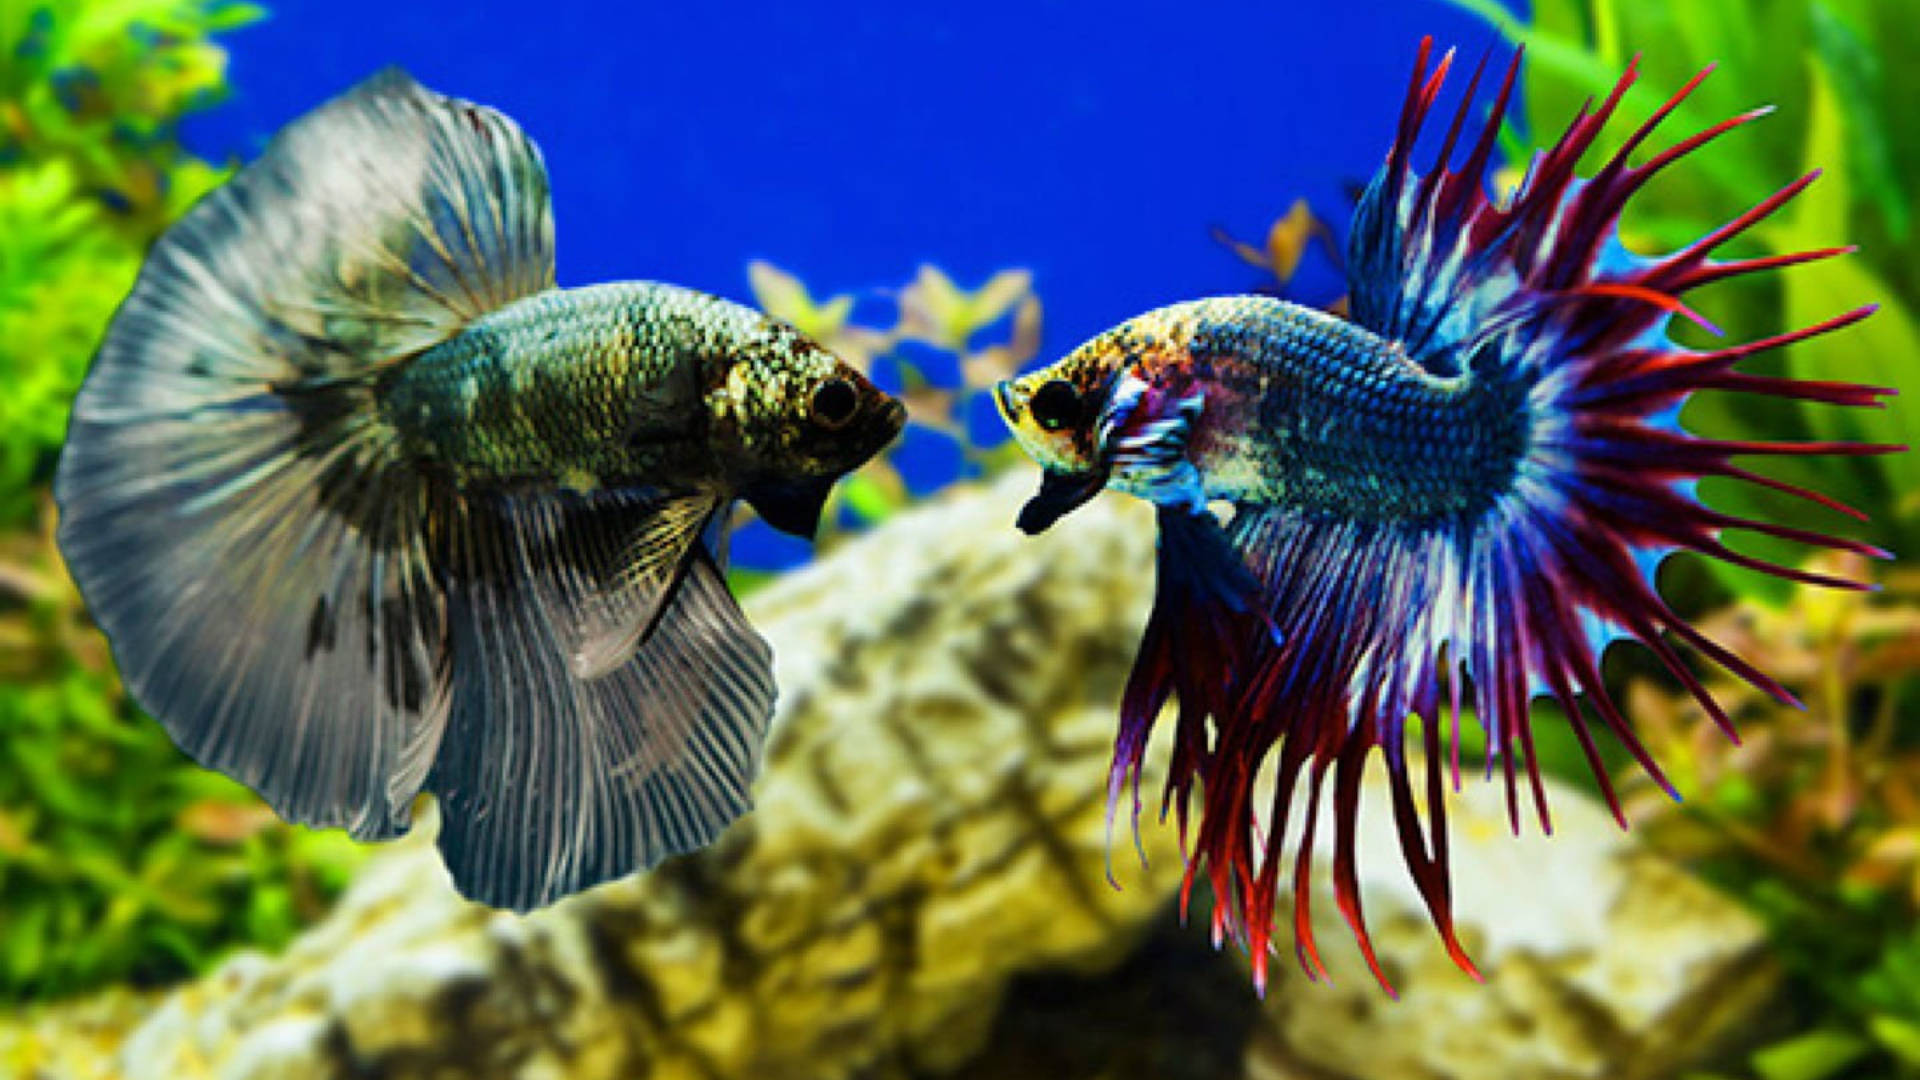 Crystal Clear Underwater Fish Live Wallpaper - free download